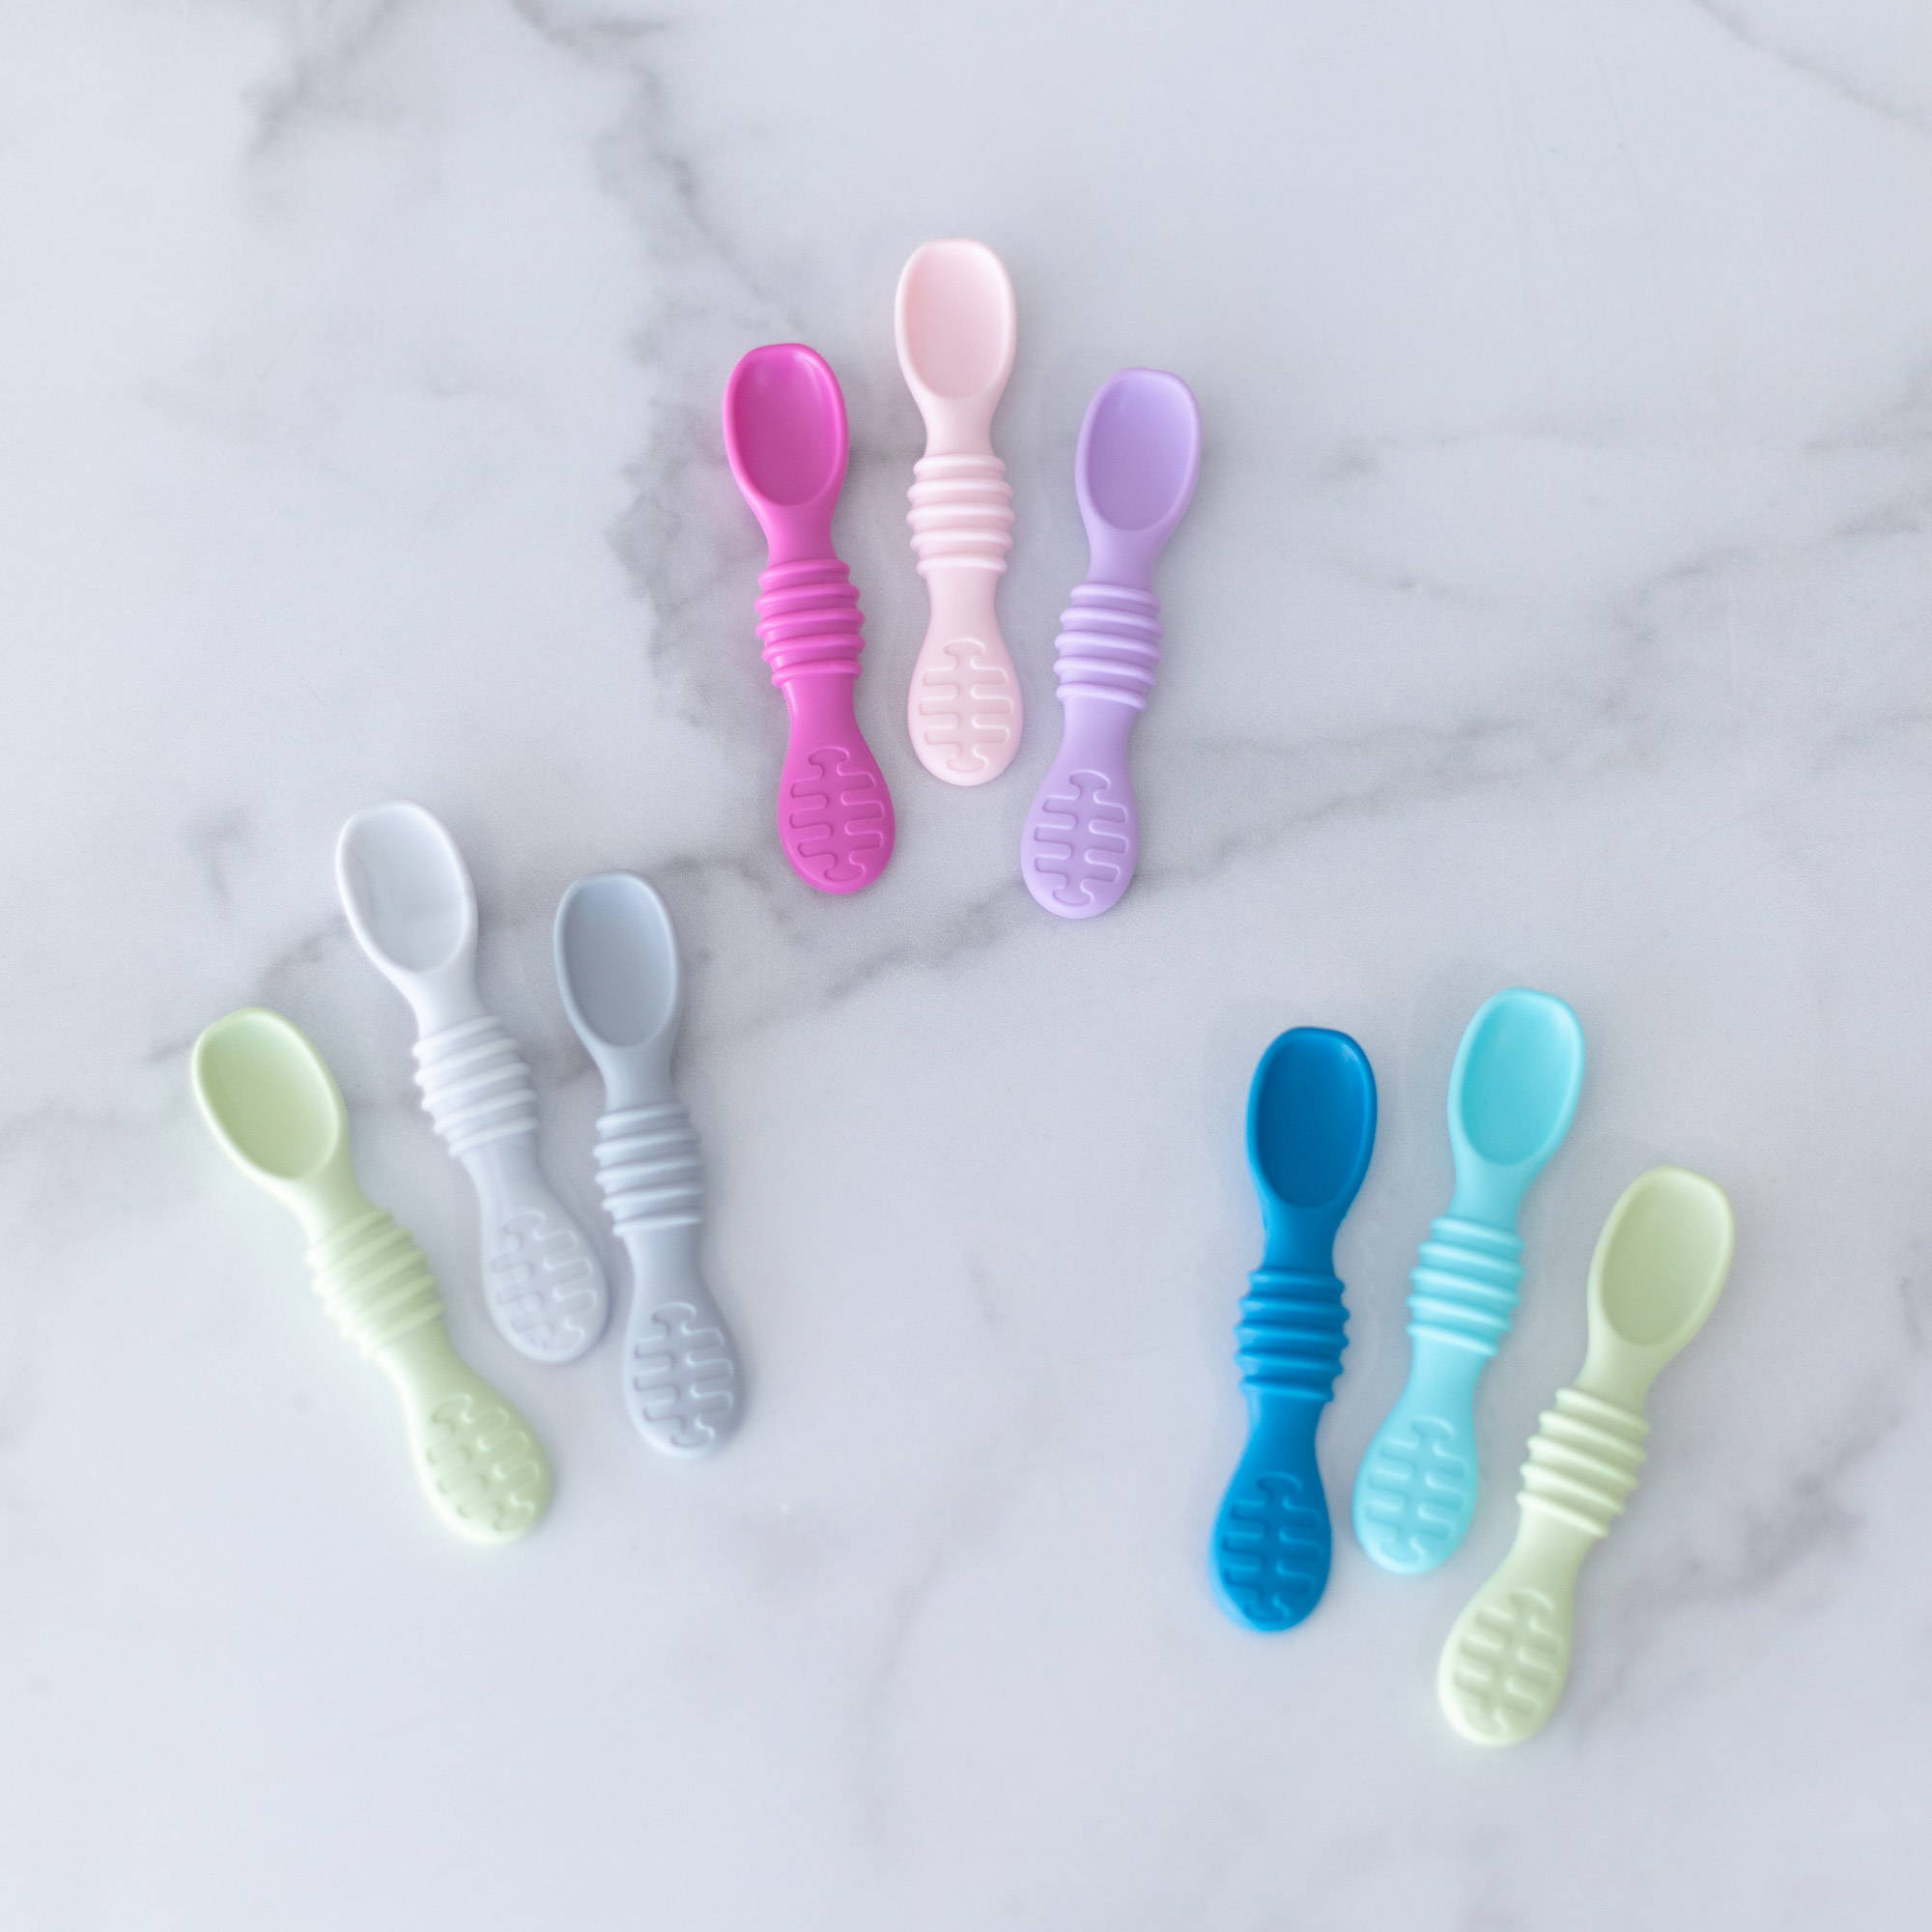 Why Our Baby Utensils Are Specific to Self-Feeding